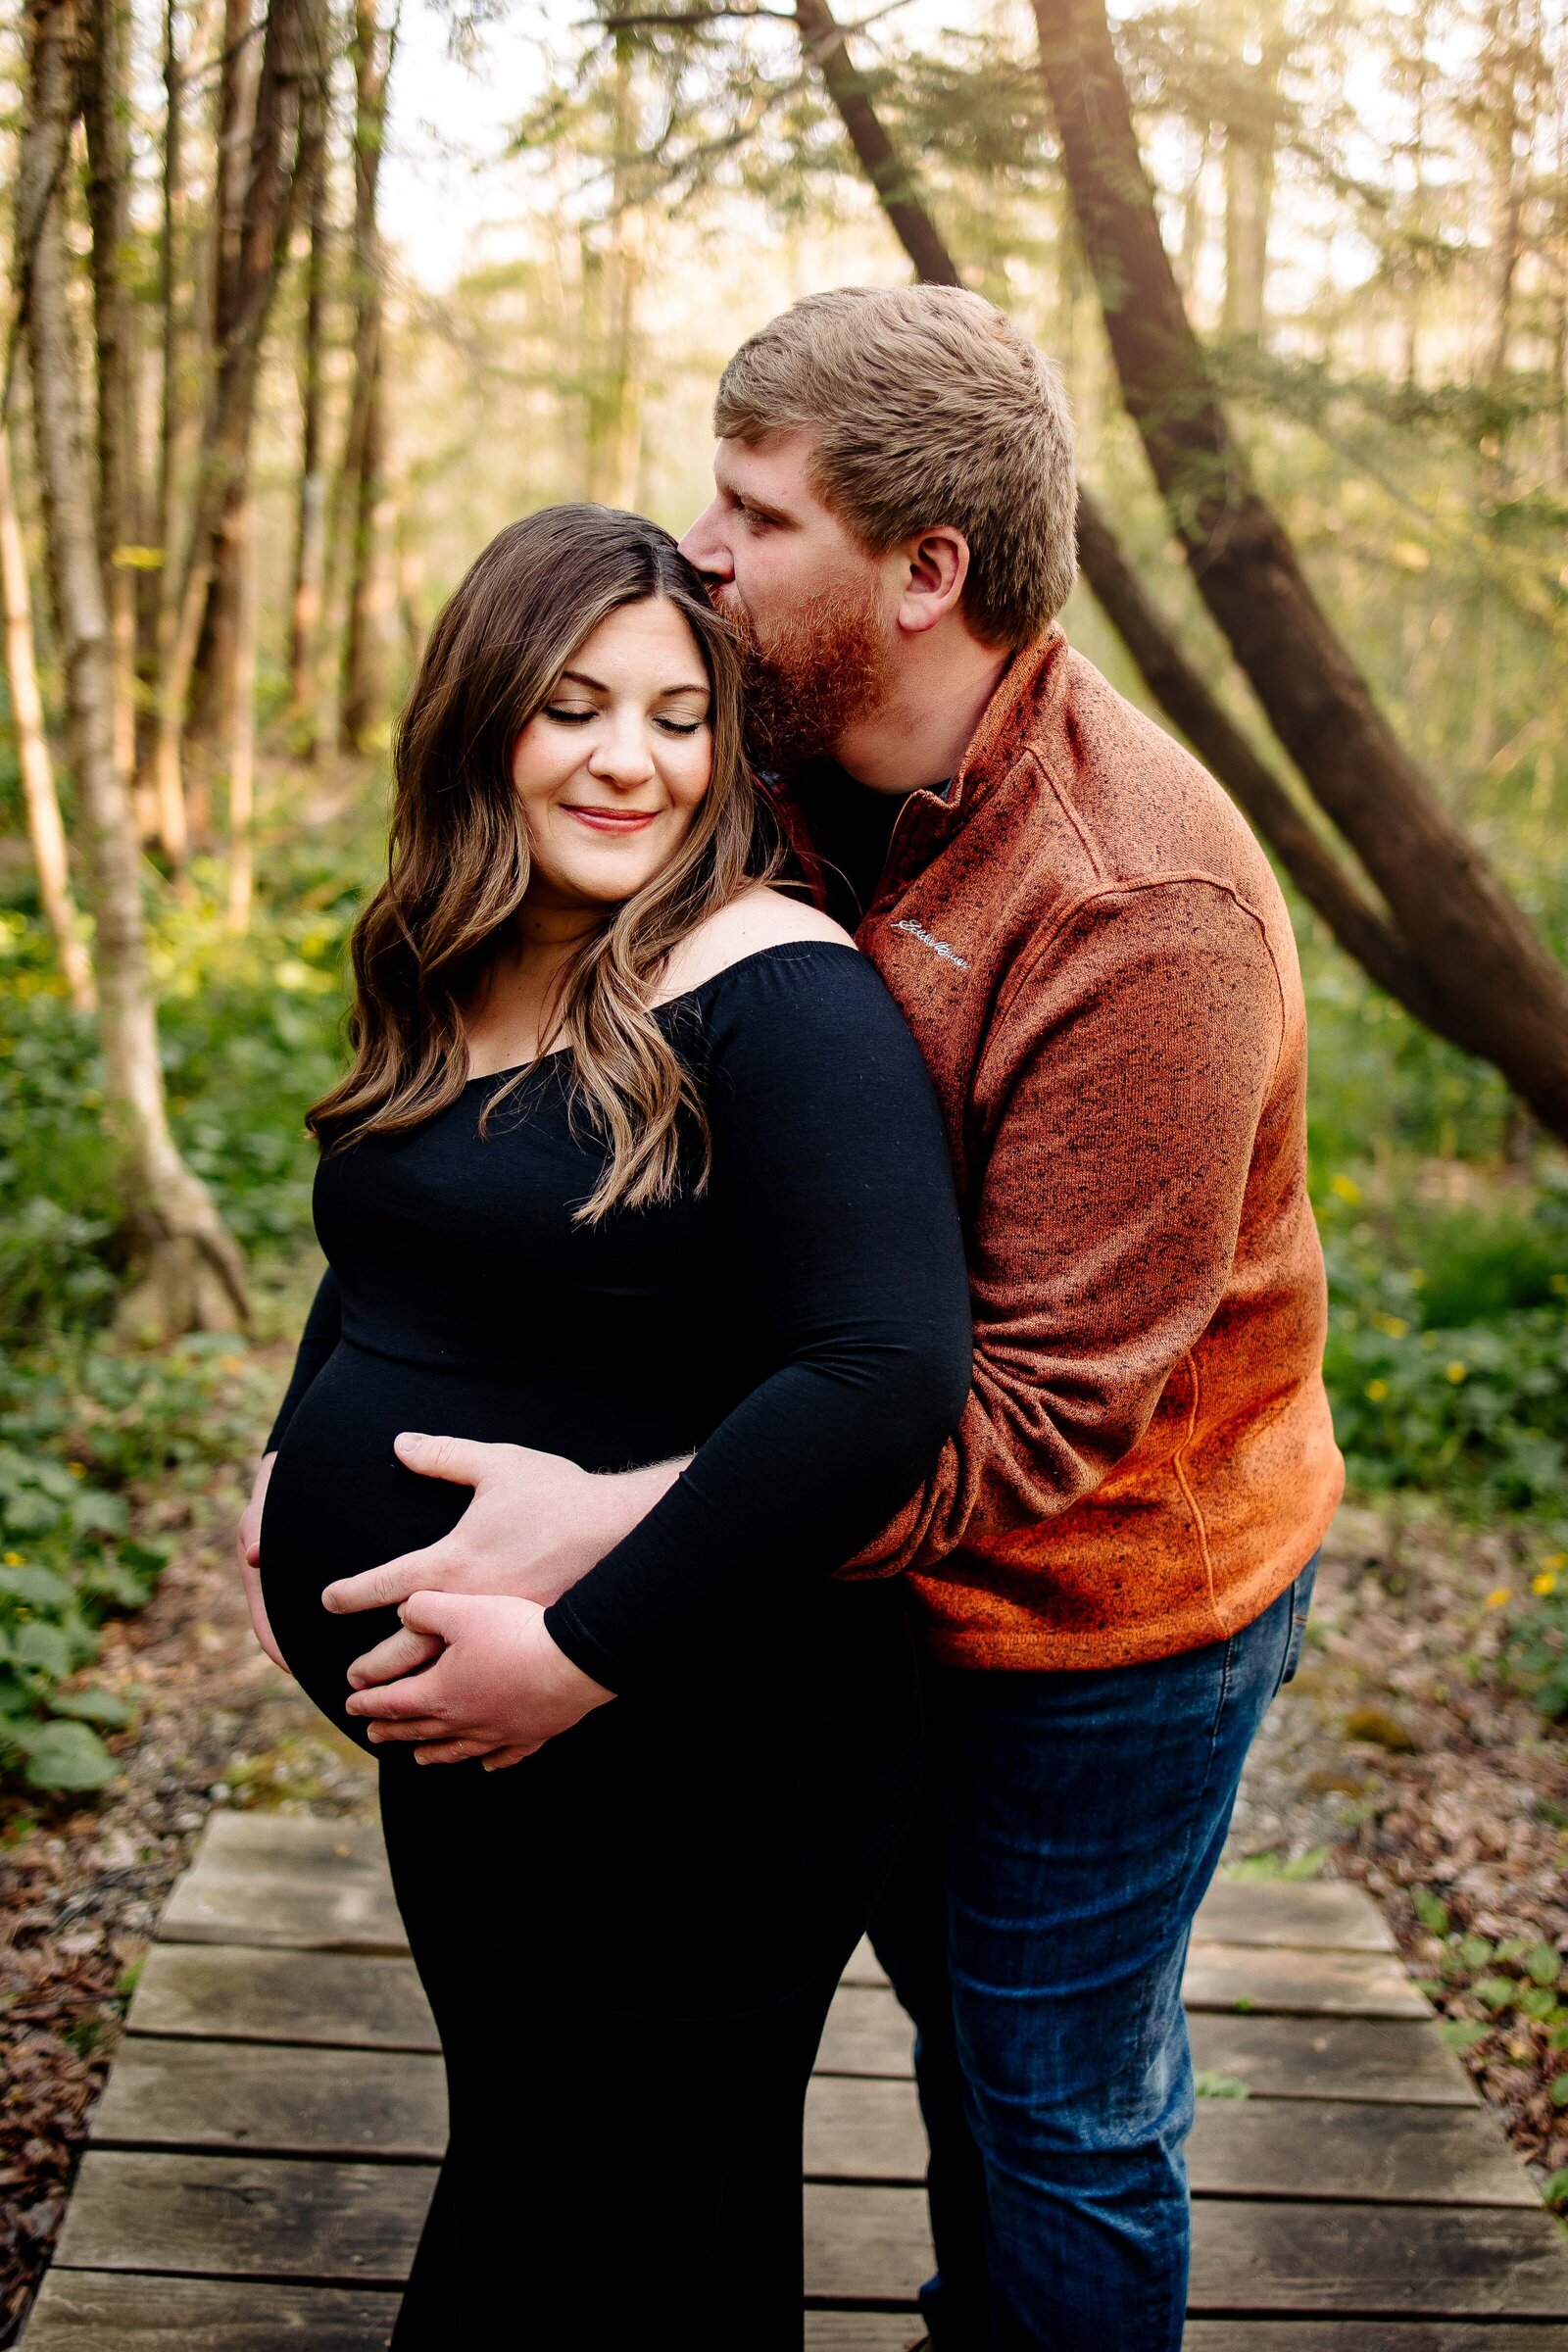 Husband cradles his wife's pregnant belly and kisses her forehead